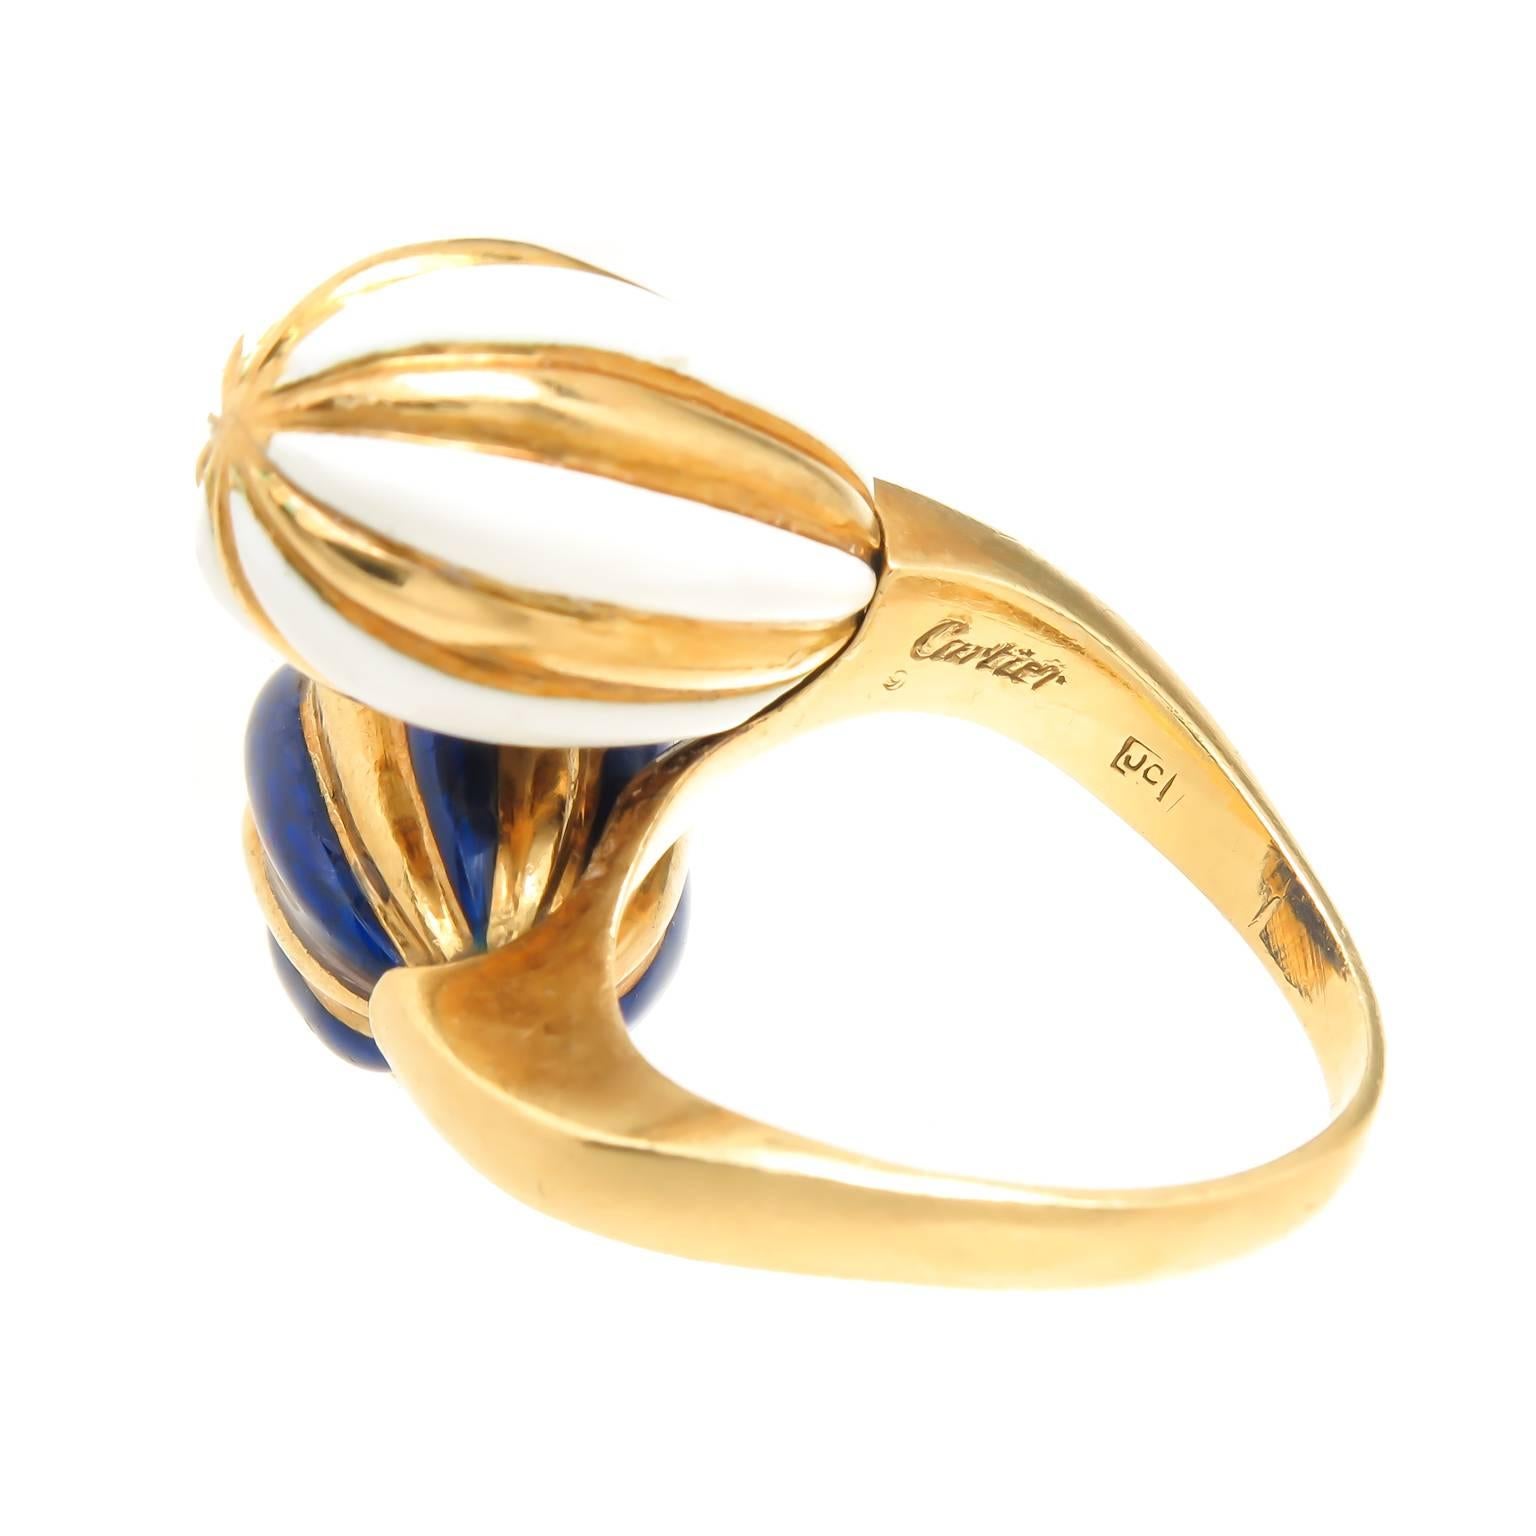 Circa 1980 Cartier 18K Yellow Gold and Enamel Ring, owned and worn by Dame Joan Collins,  having two oval bulb form elements in a by pass design, measuring 1 inch across the top. Signed and numbered and having British stamps from the London Cartier